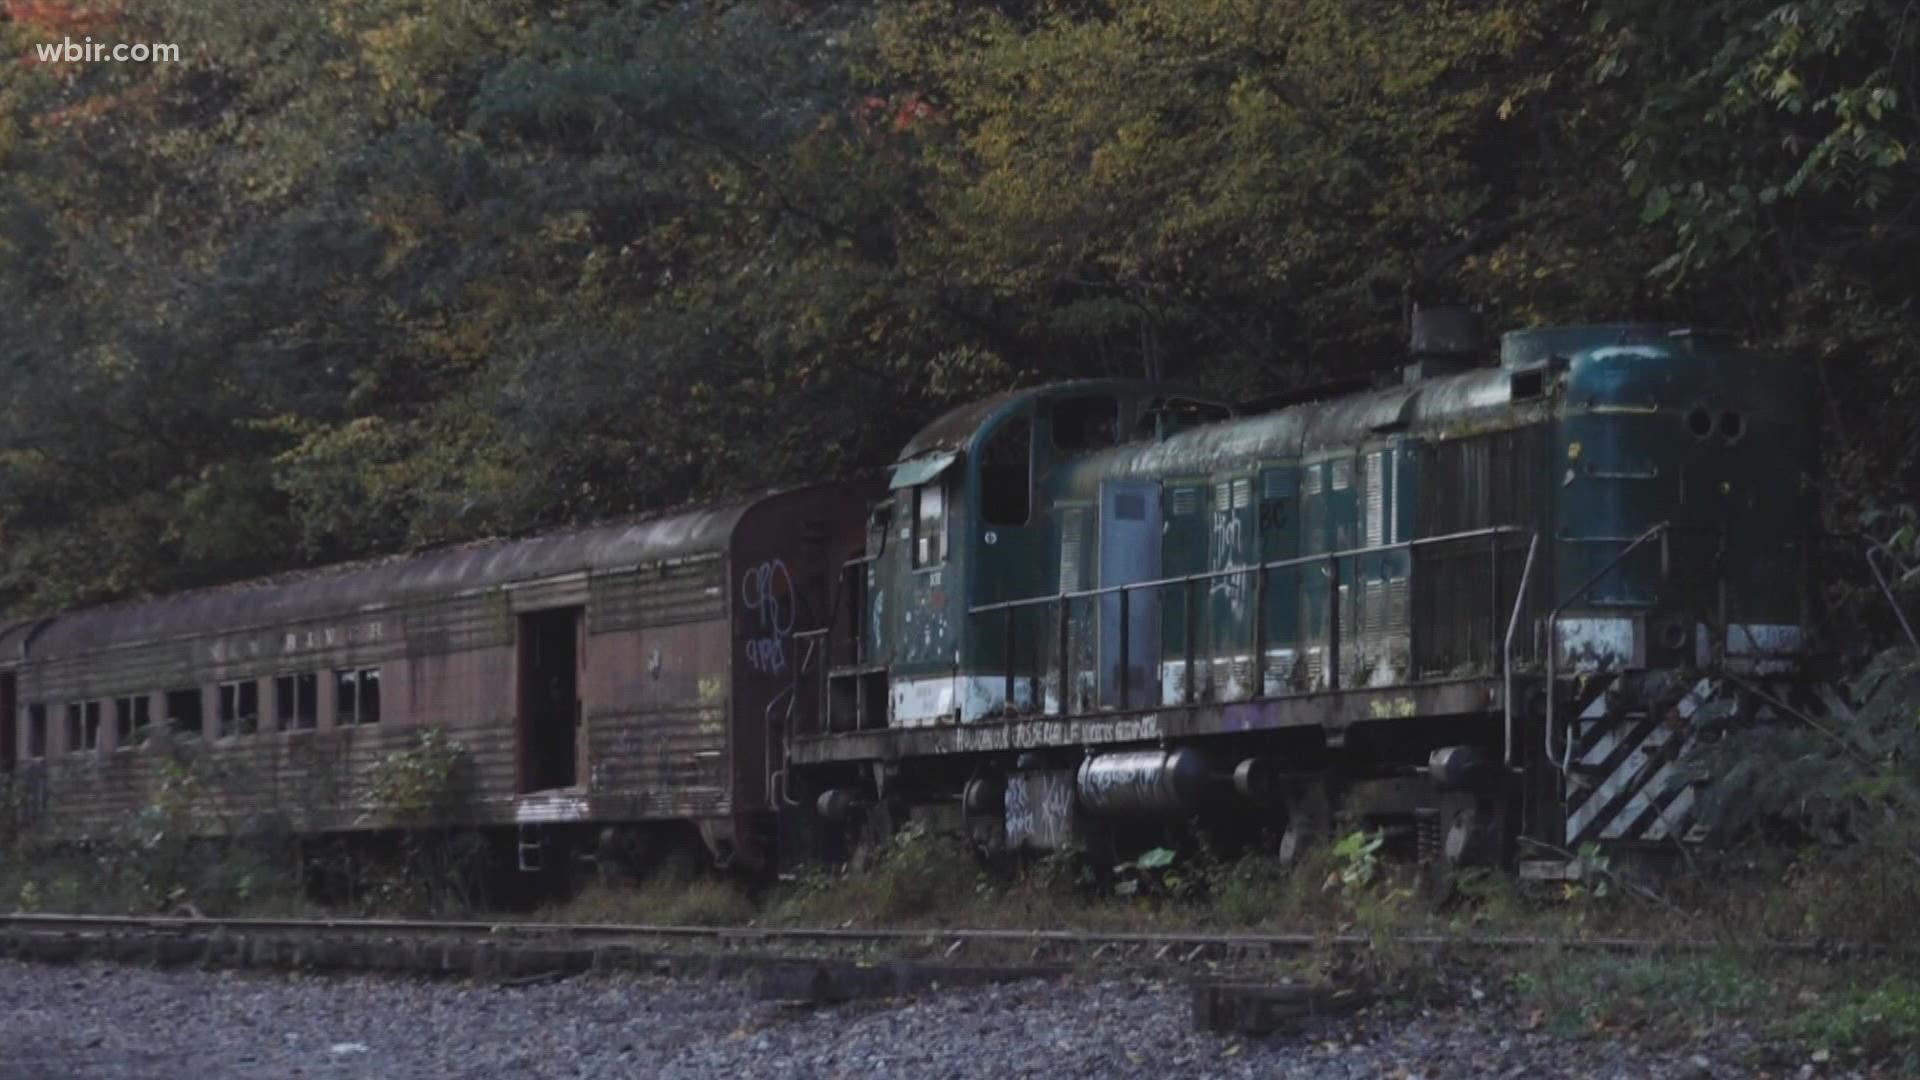 This rusted locomotive once took tourists on a 62-mile journey through East Tennessee. Now, it sits at the end of its line tucked away in the hills it used to tour.